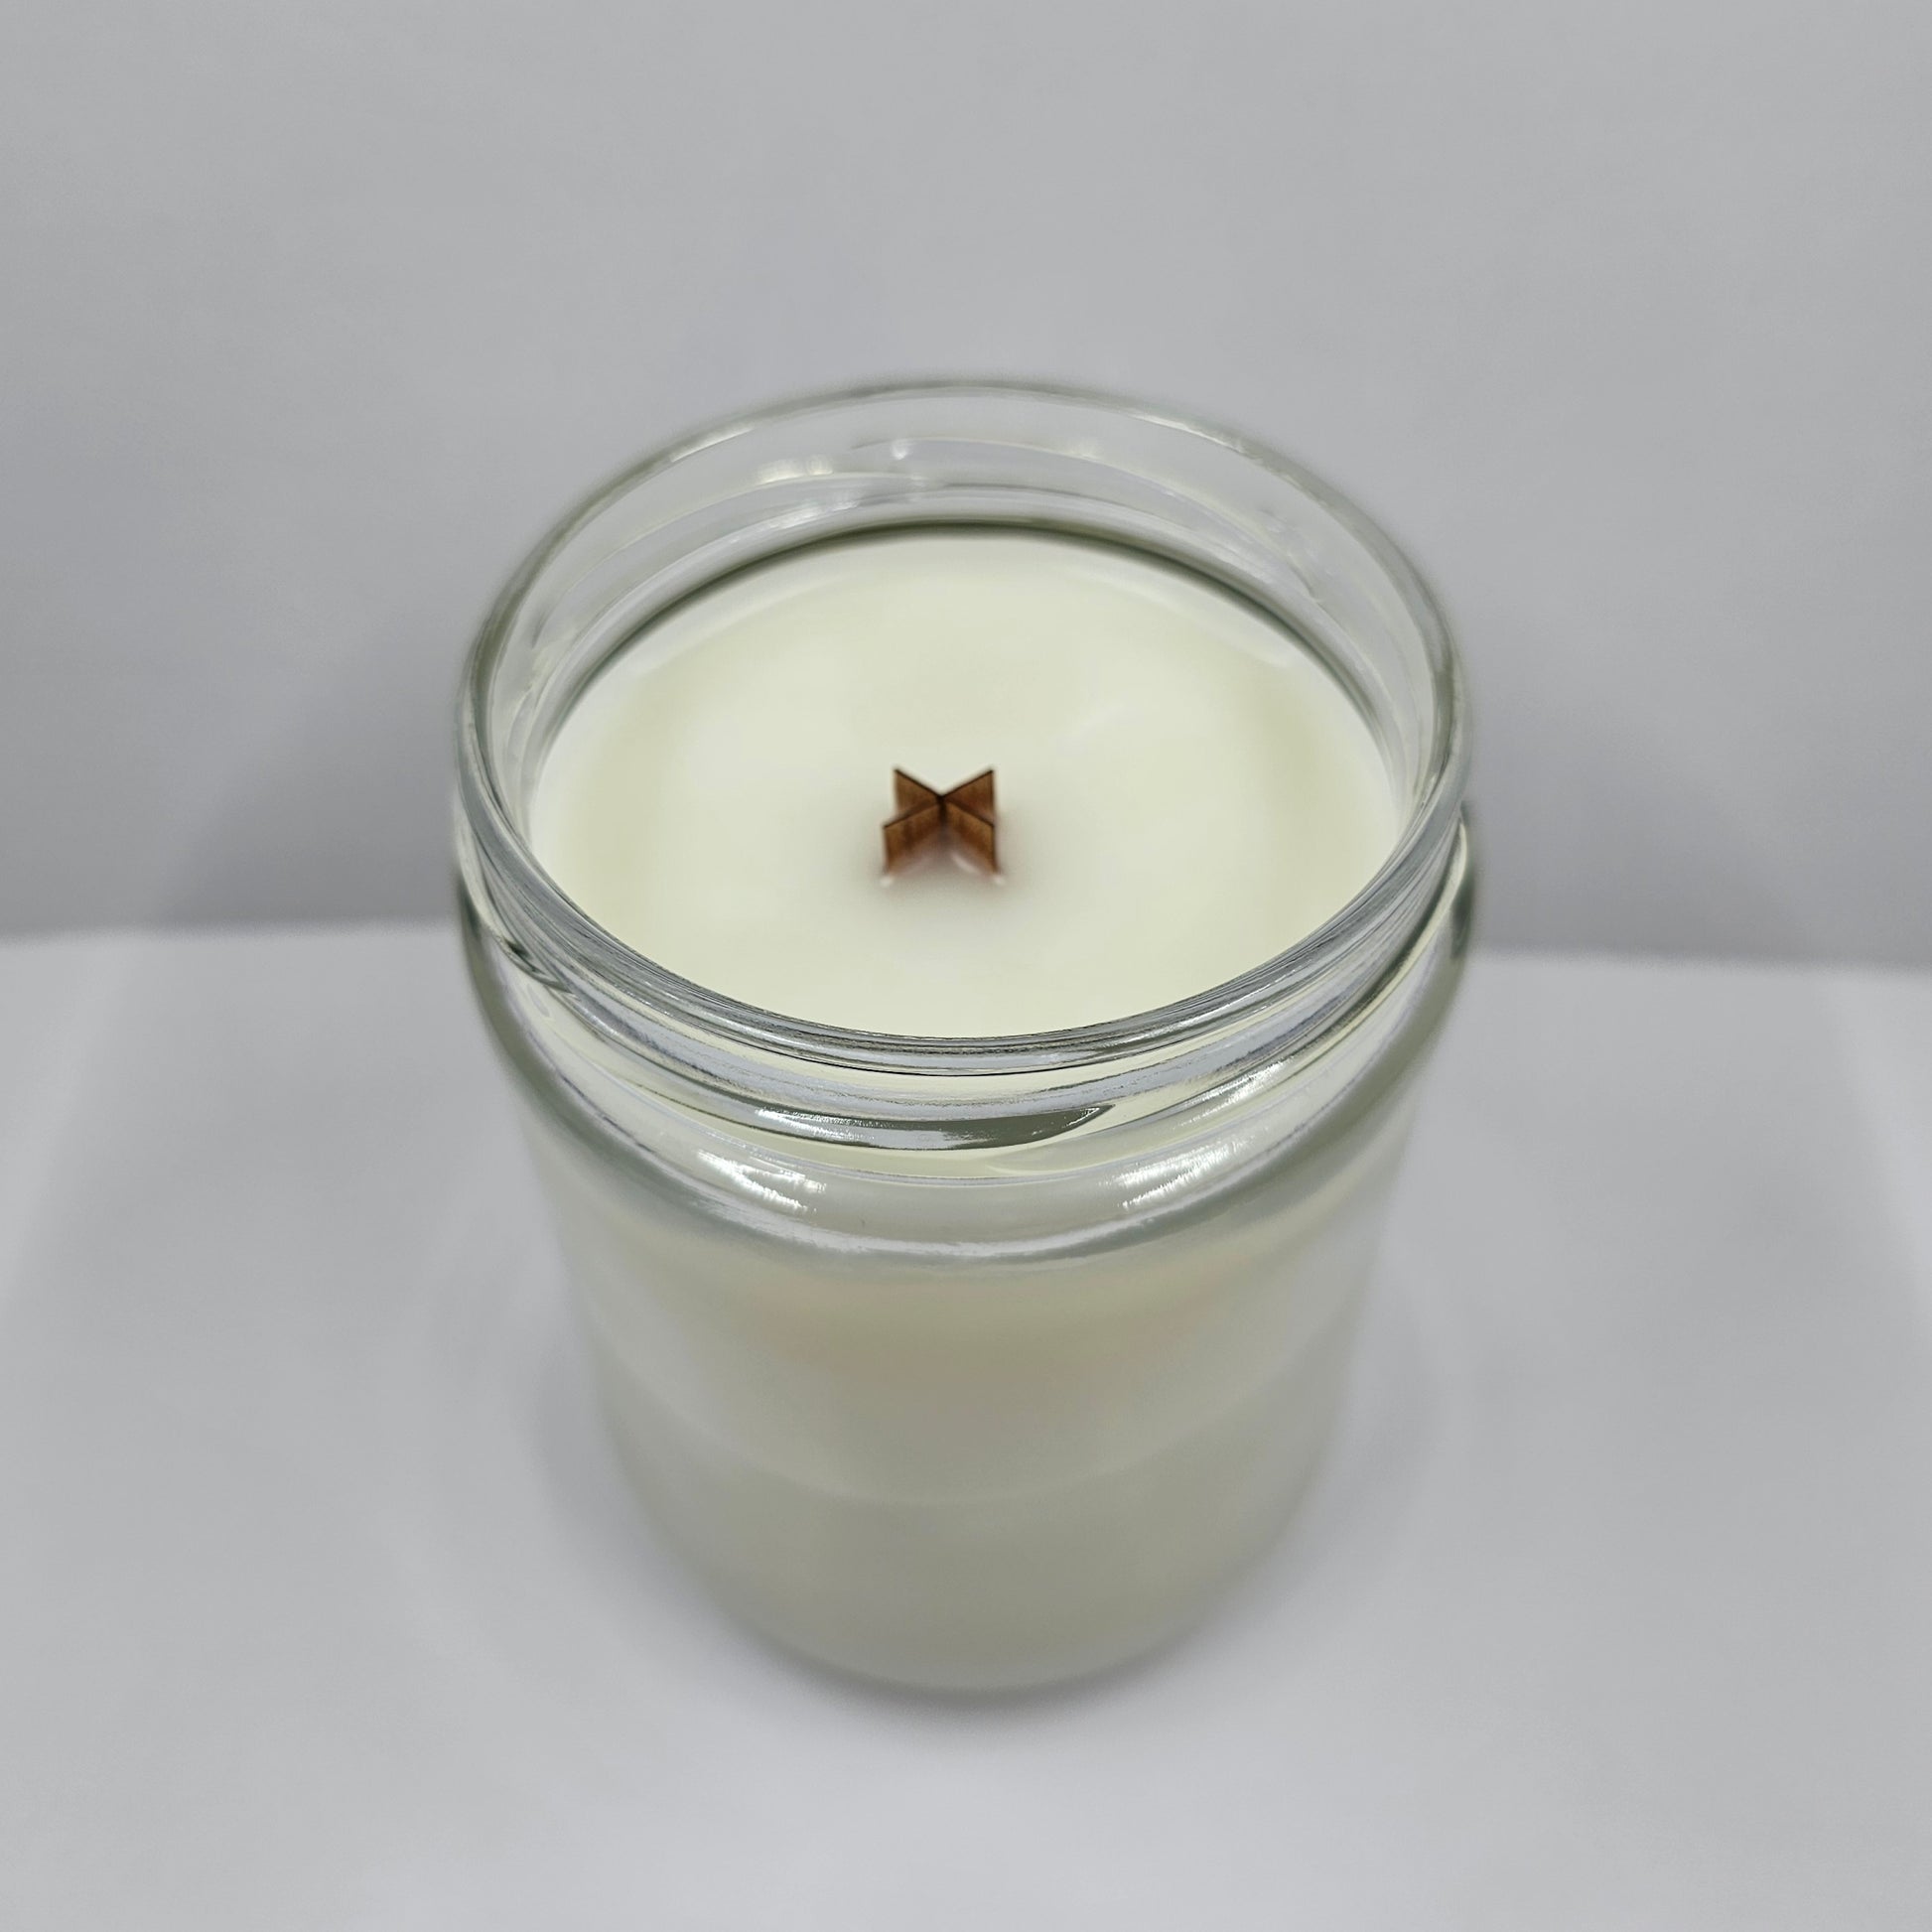 a glass jar filled with a white candle